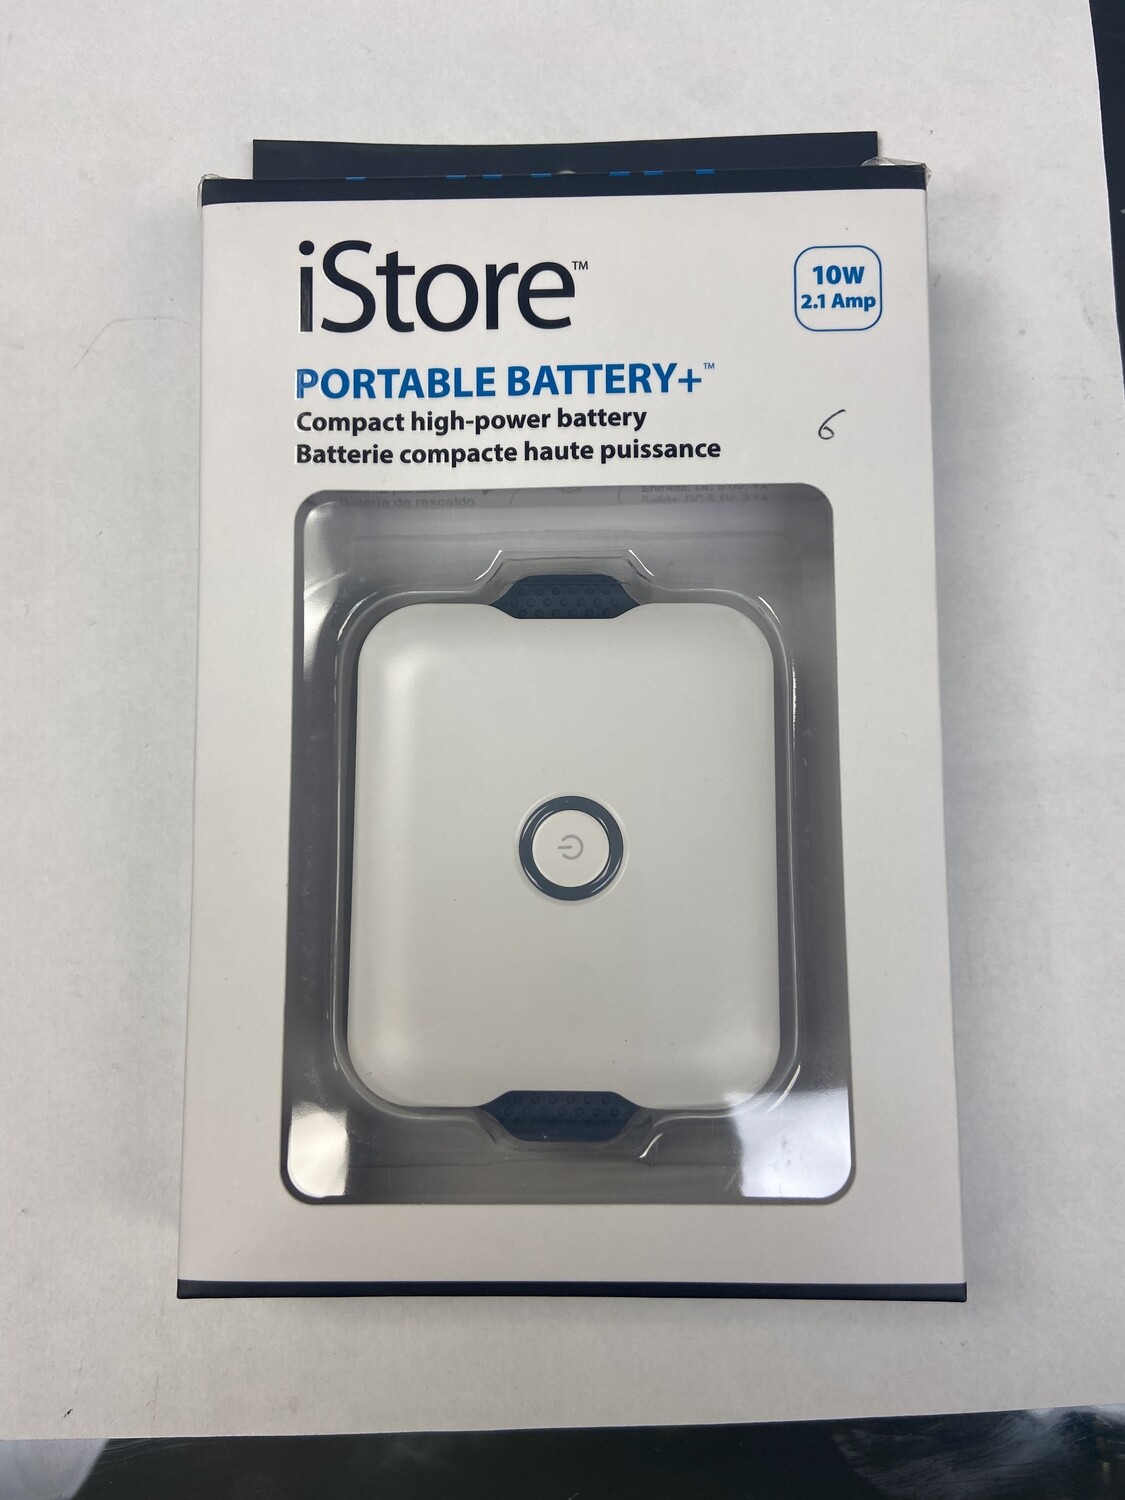 iStore Portable Battery